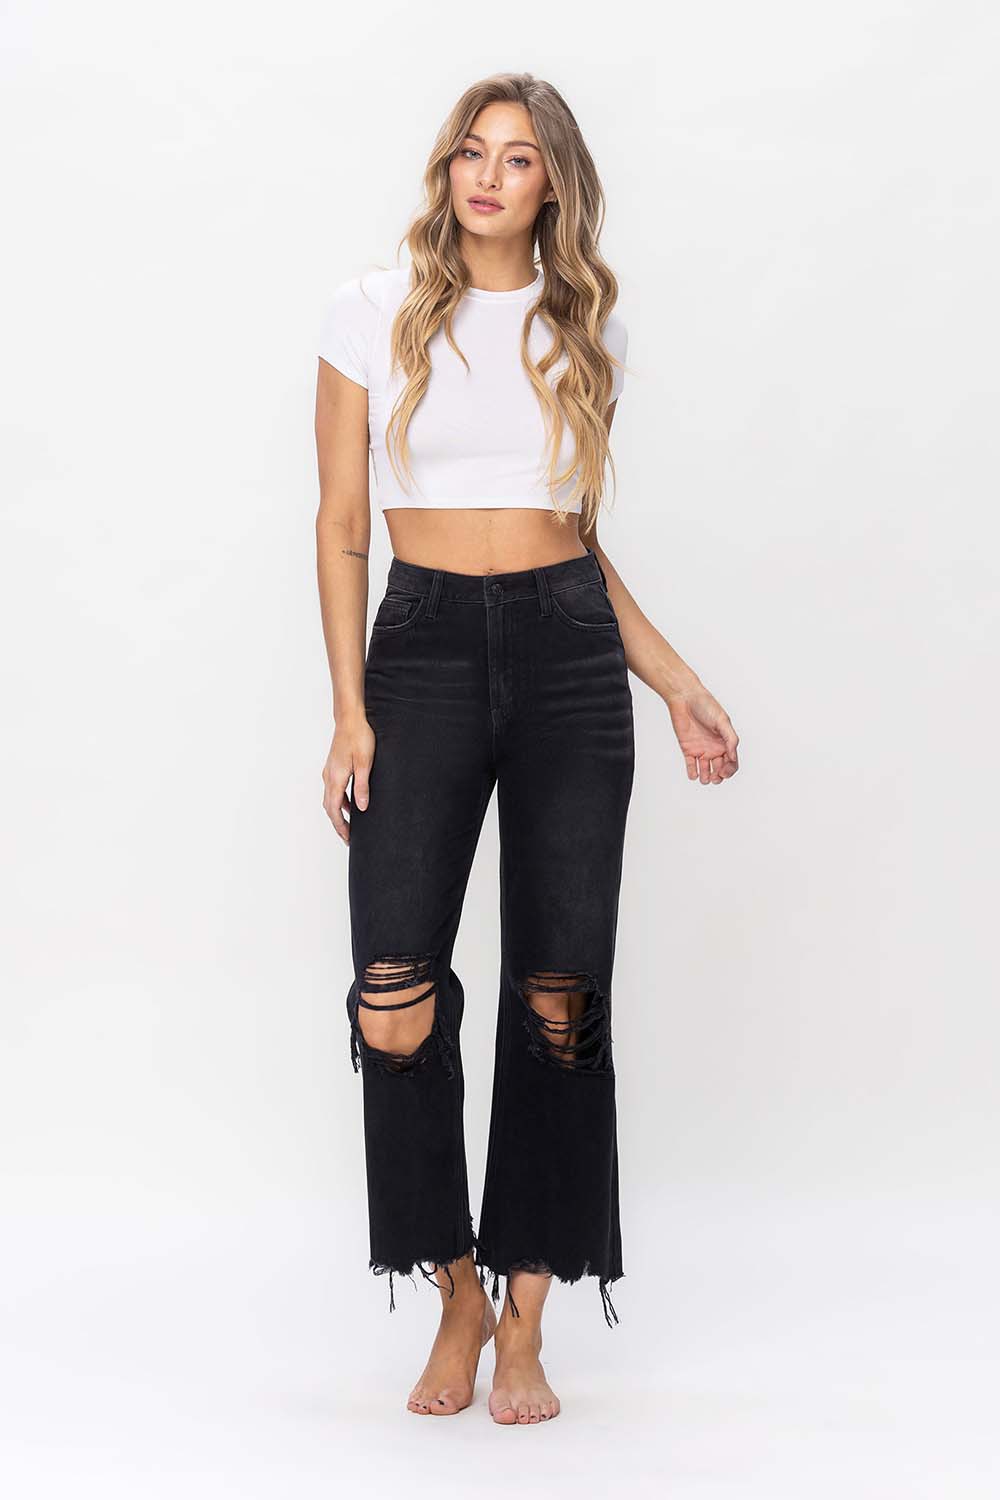 Retrofete Barrymore Low Rise Flared Jeans in Faded Black